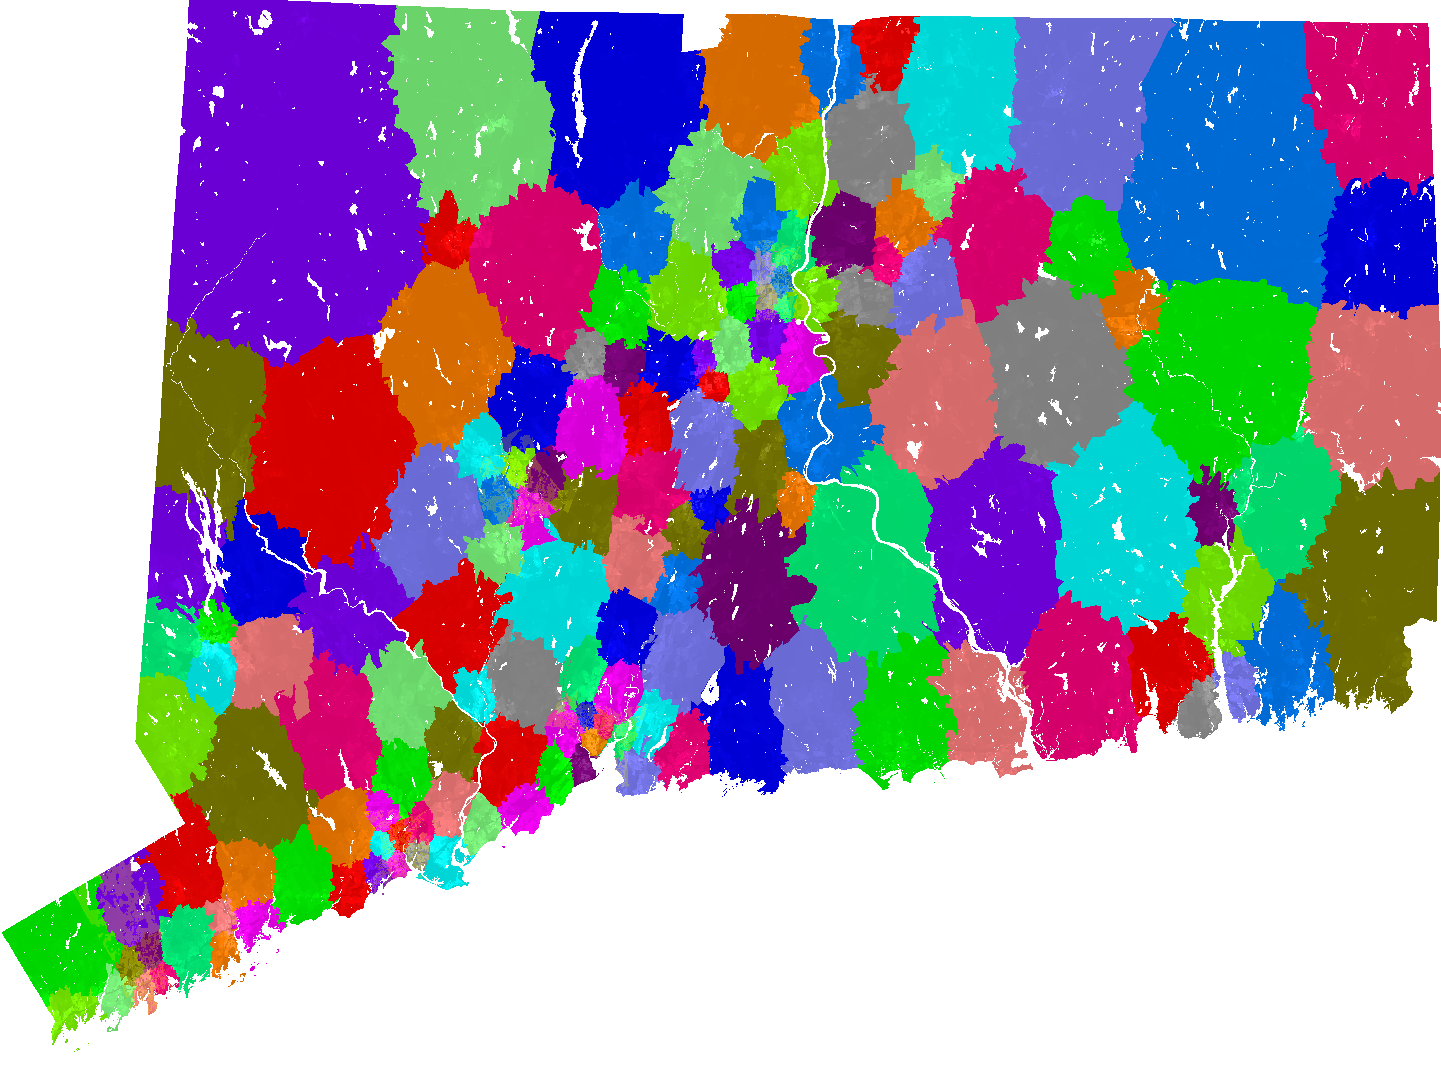 Connecticut House of Representatives Redistricting